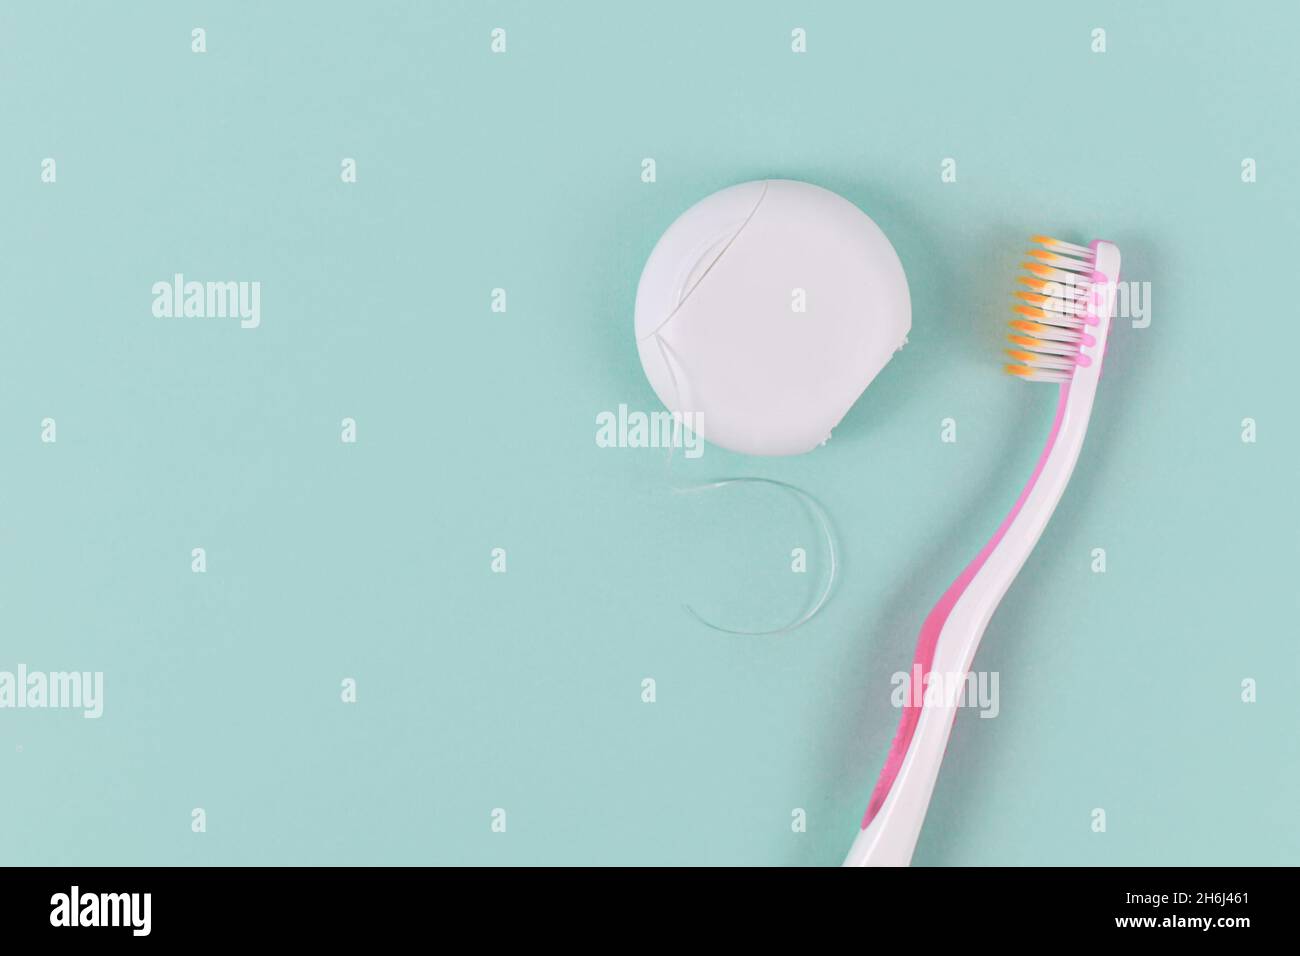 Dental floss and tooth brush on side of green background with copy space Stock Photo